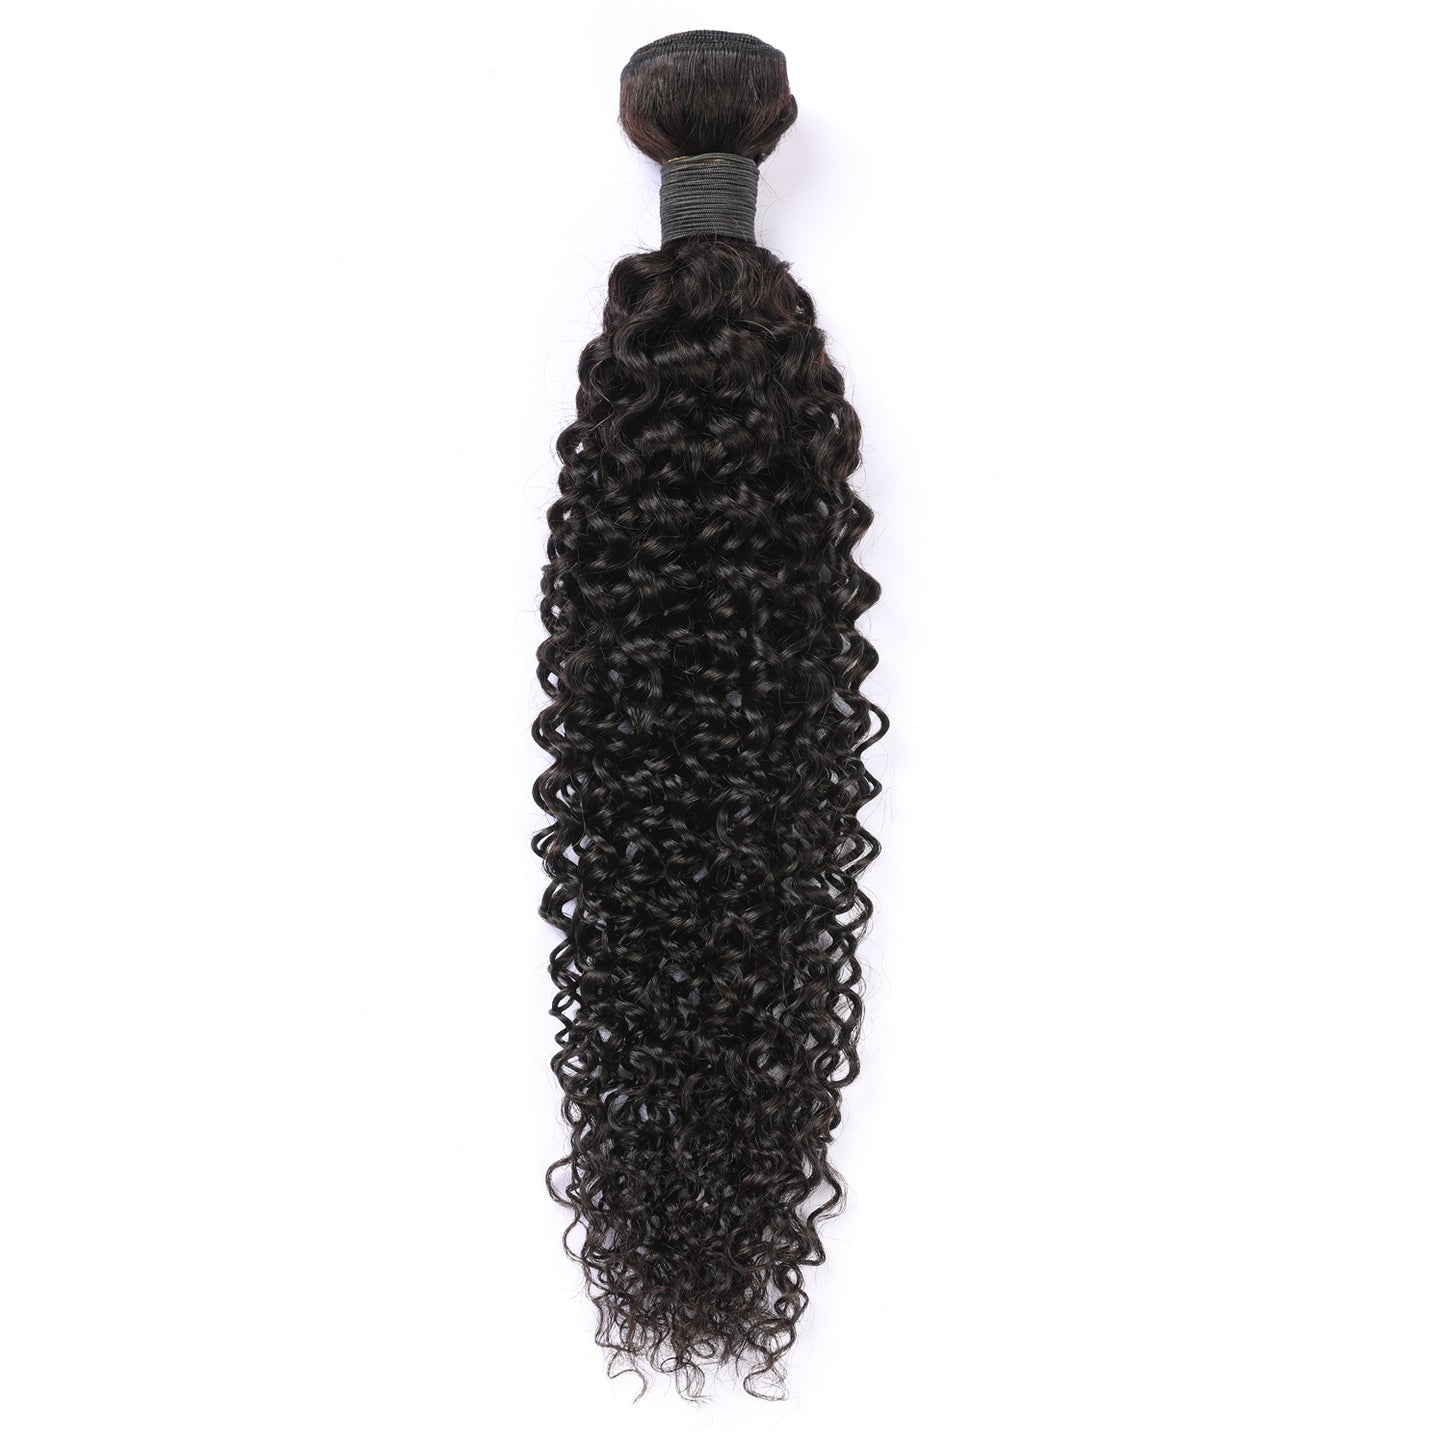 Real Human Hair Bundles Black Color Curly Style